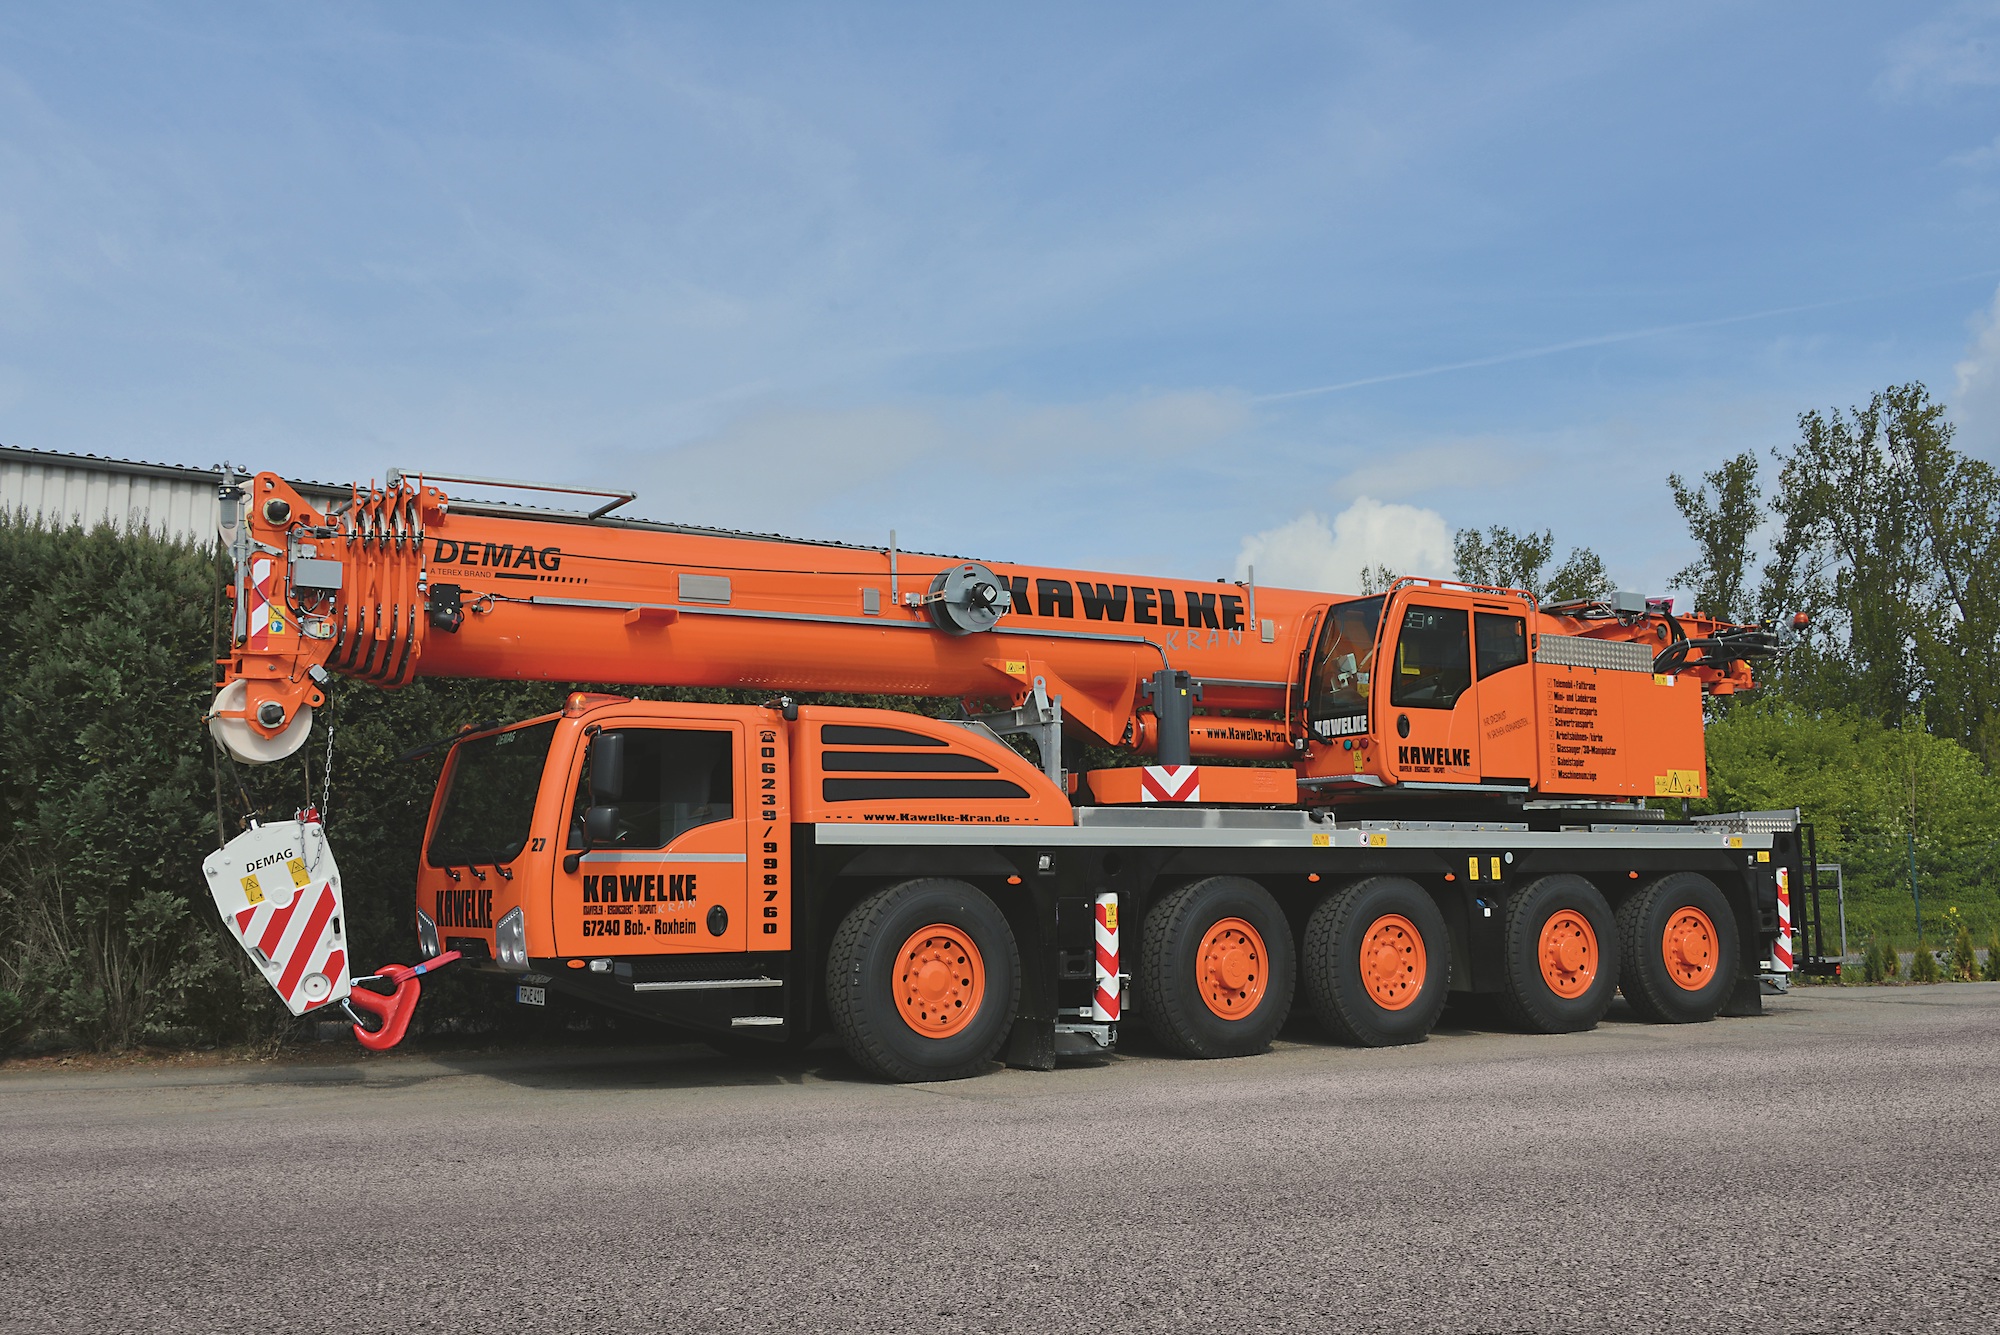 The Advantages of Using Mobile Crane Lifting Services